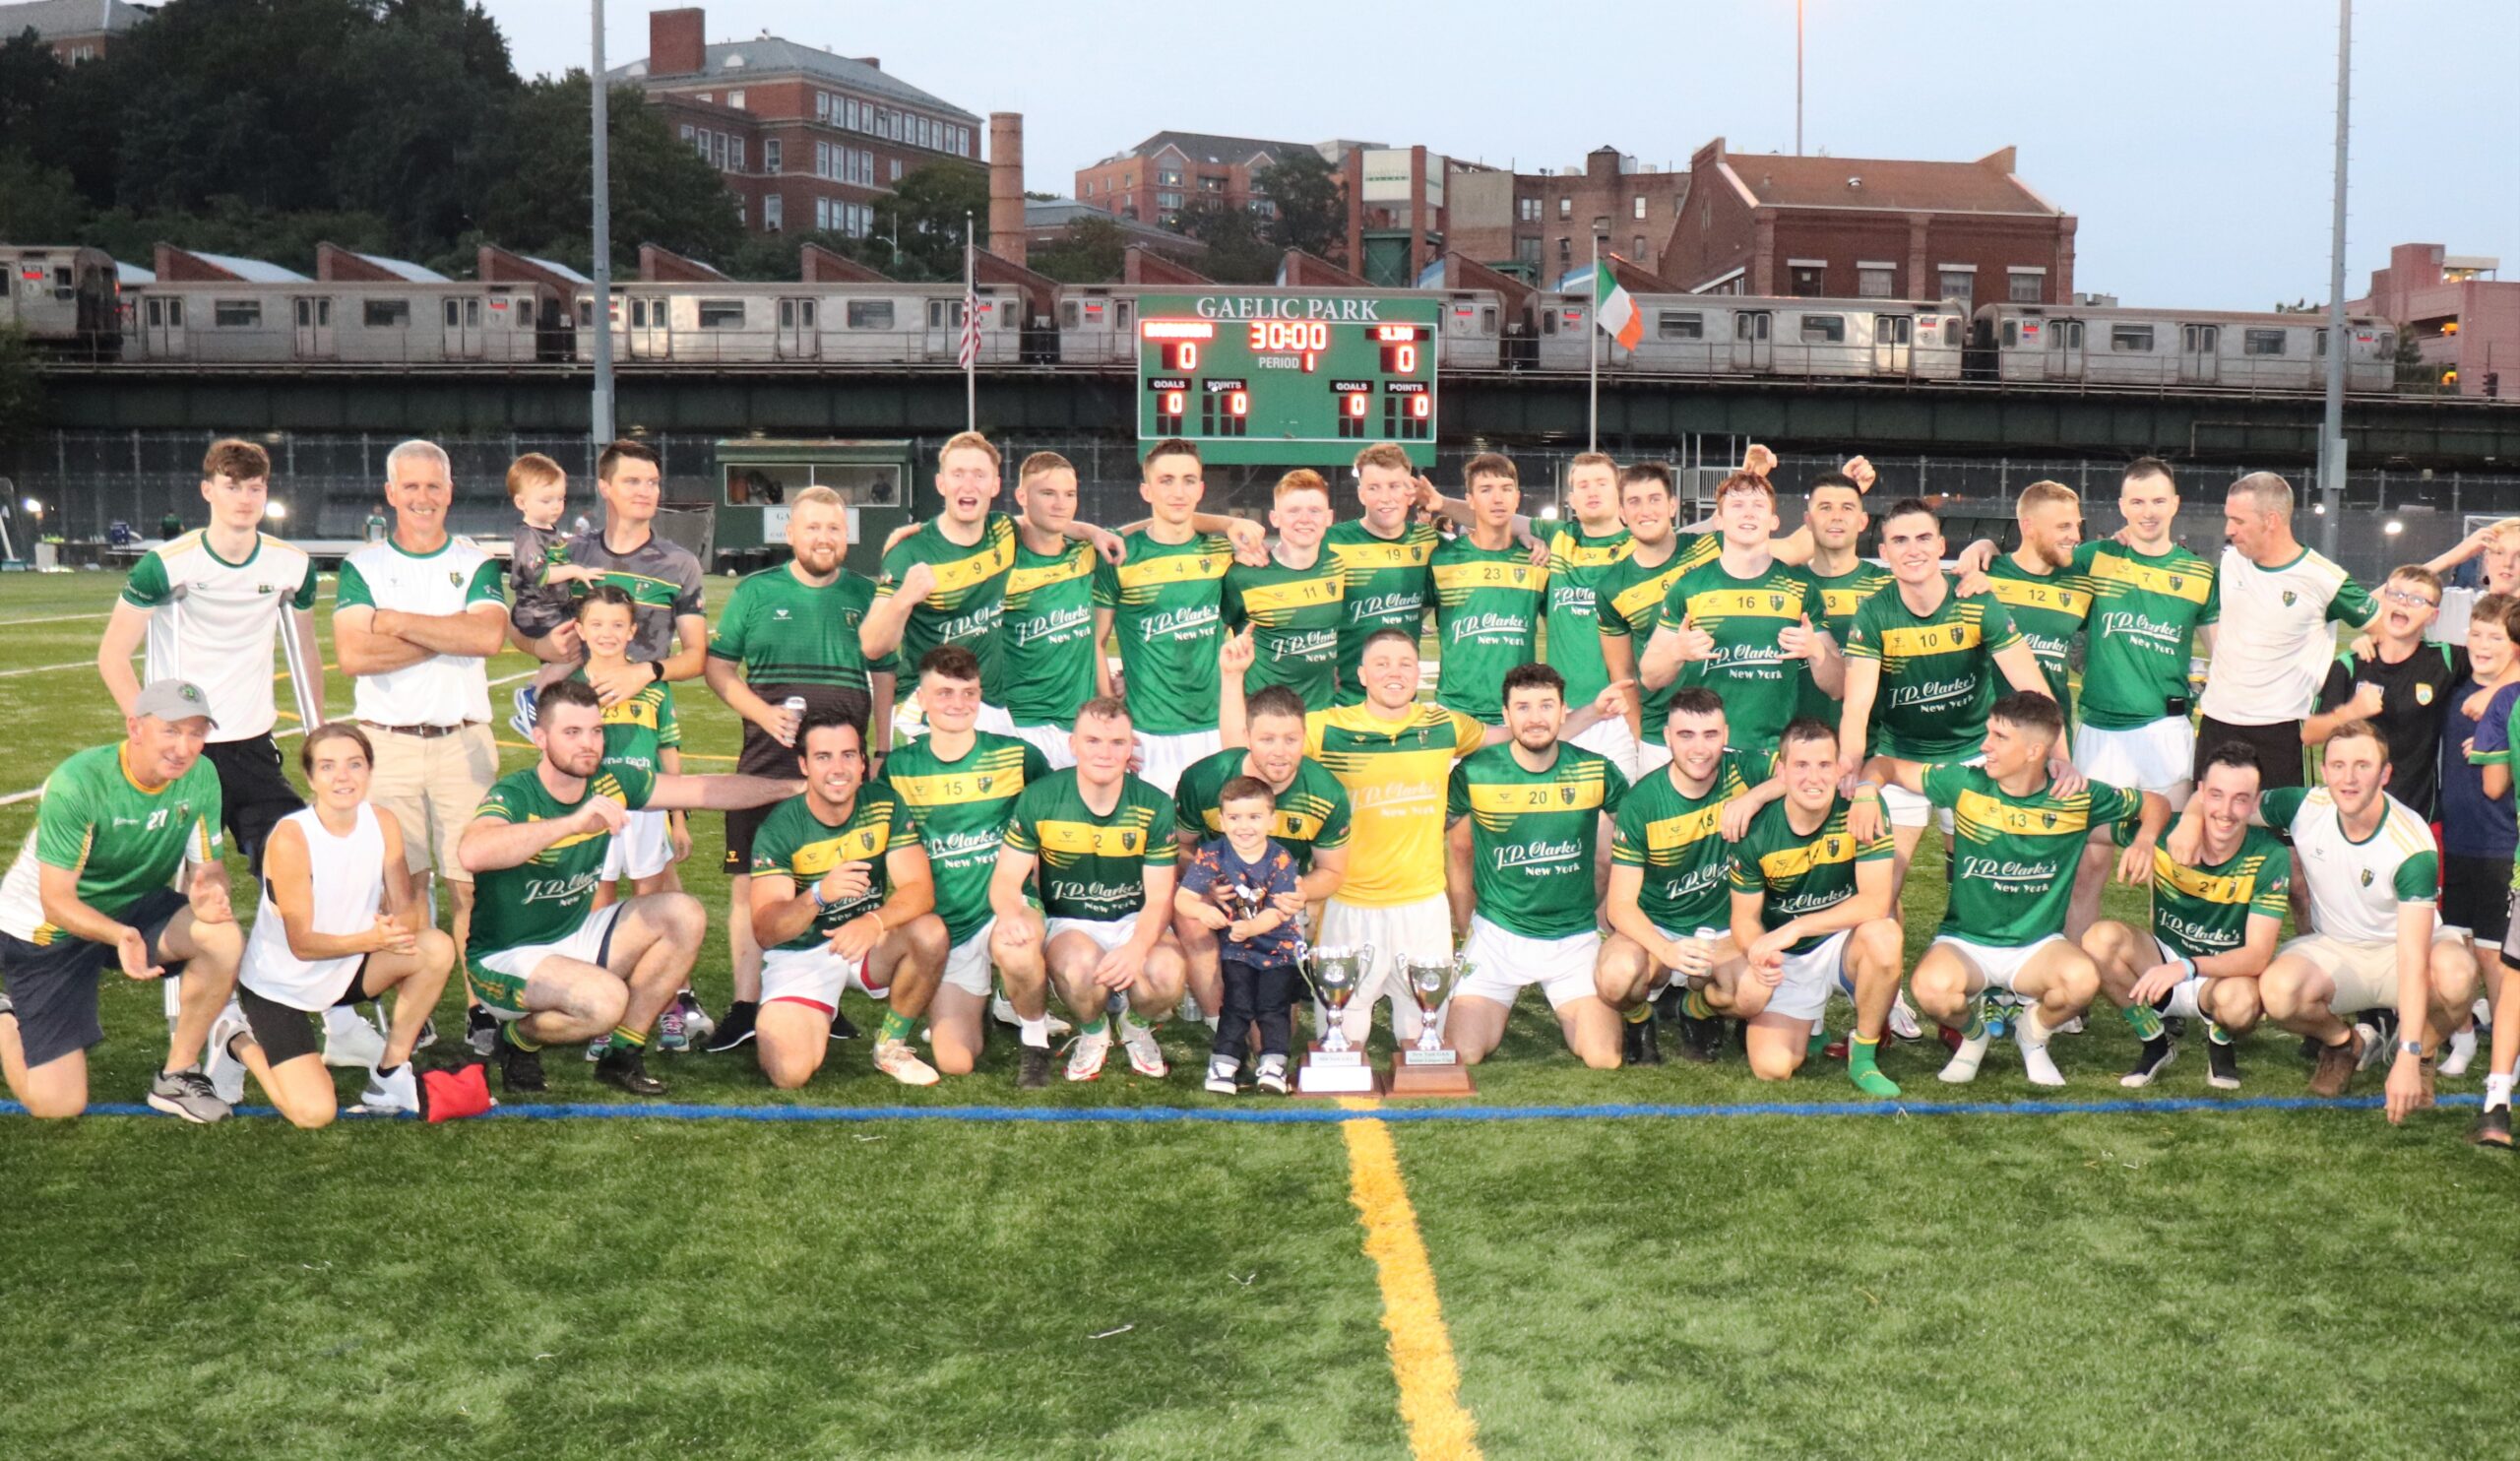 The St. Barnabas panel and back room team after winning the 2021 New York Senior Football title (Photo by Michael Dorgan, The Long Hall Podcast)